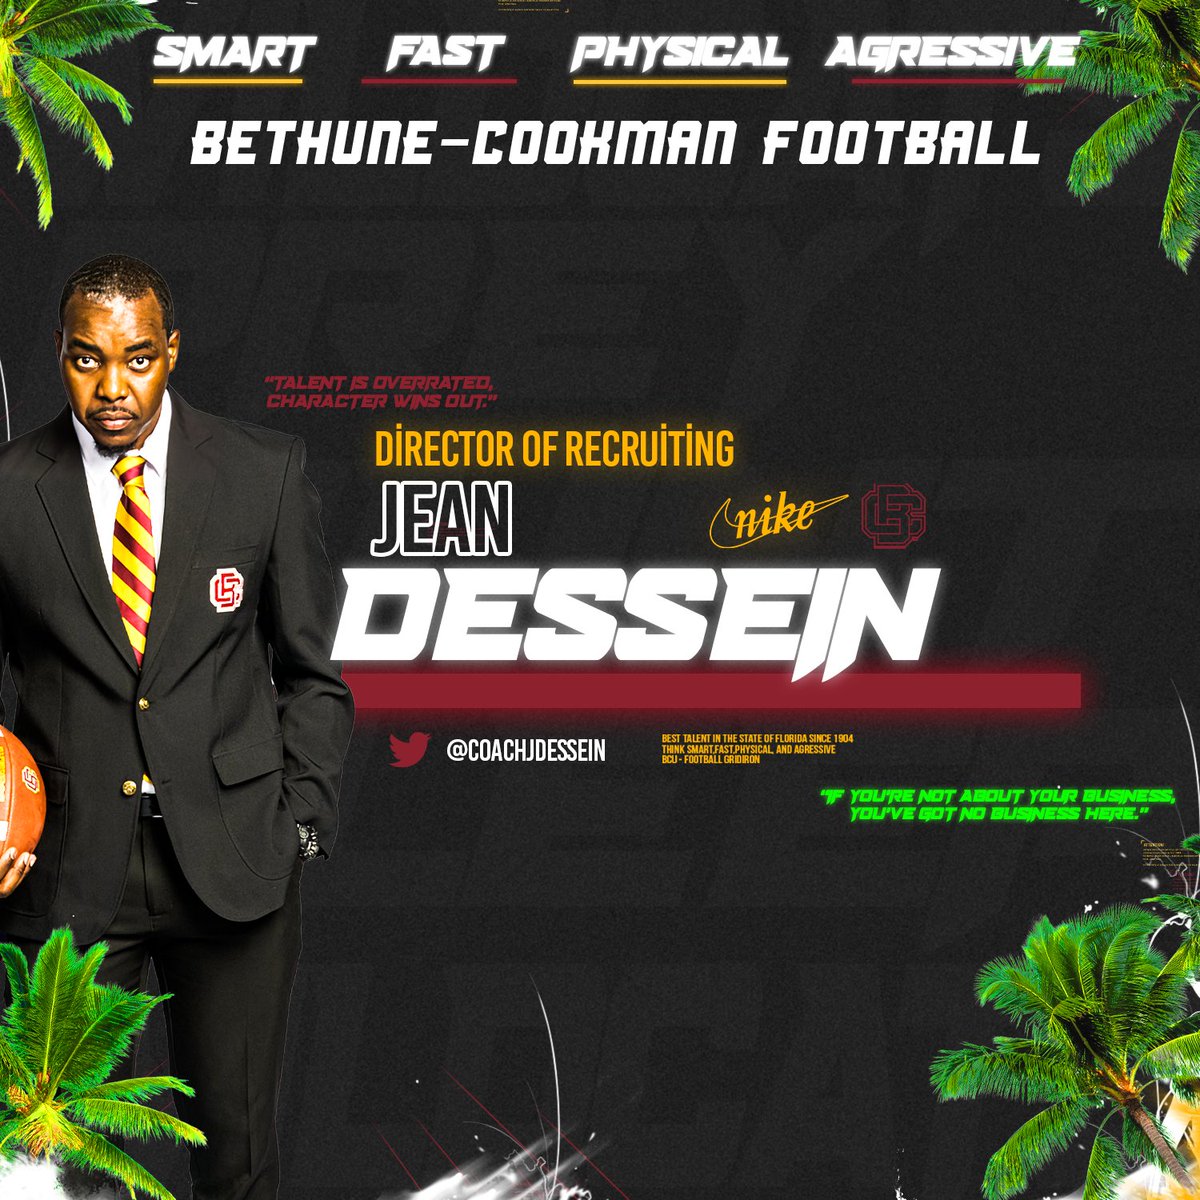 🚨 PROMOTION 🚨 

Jean Dessein has been promoted to Director of Recruiting!

#𝗟𝗲𝘁𝘀𝗚𝗼 | #𝗛𝗮𝗶𝗹𝗪𝗶𝗹𝗱𝗰𝗮𝘁𝘀 | #𝗣𝗿𝗲𝘆𝗧𝗼𝗴𝗲𝘁𝗵𝗲𝗿